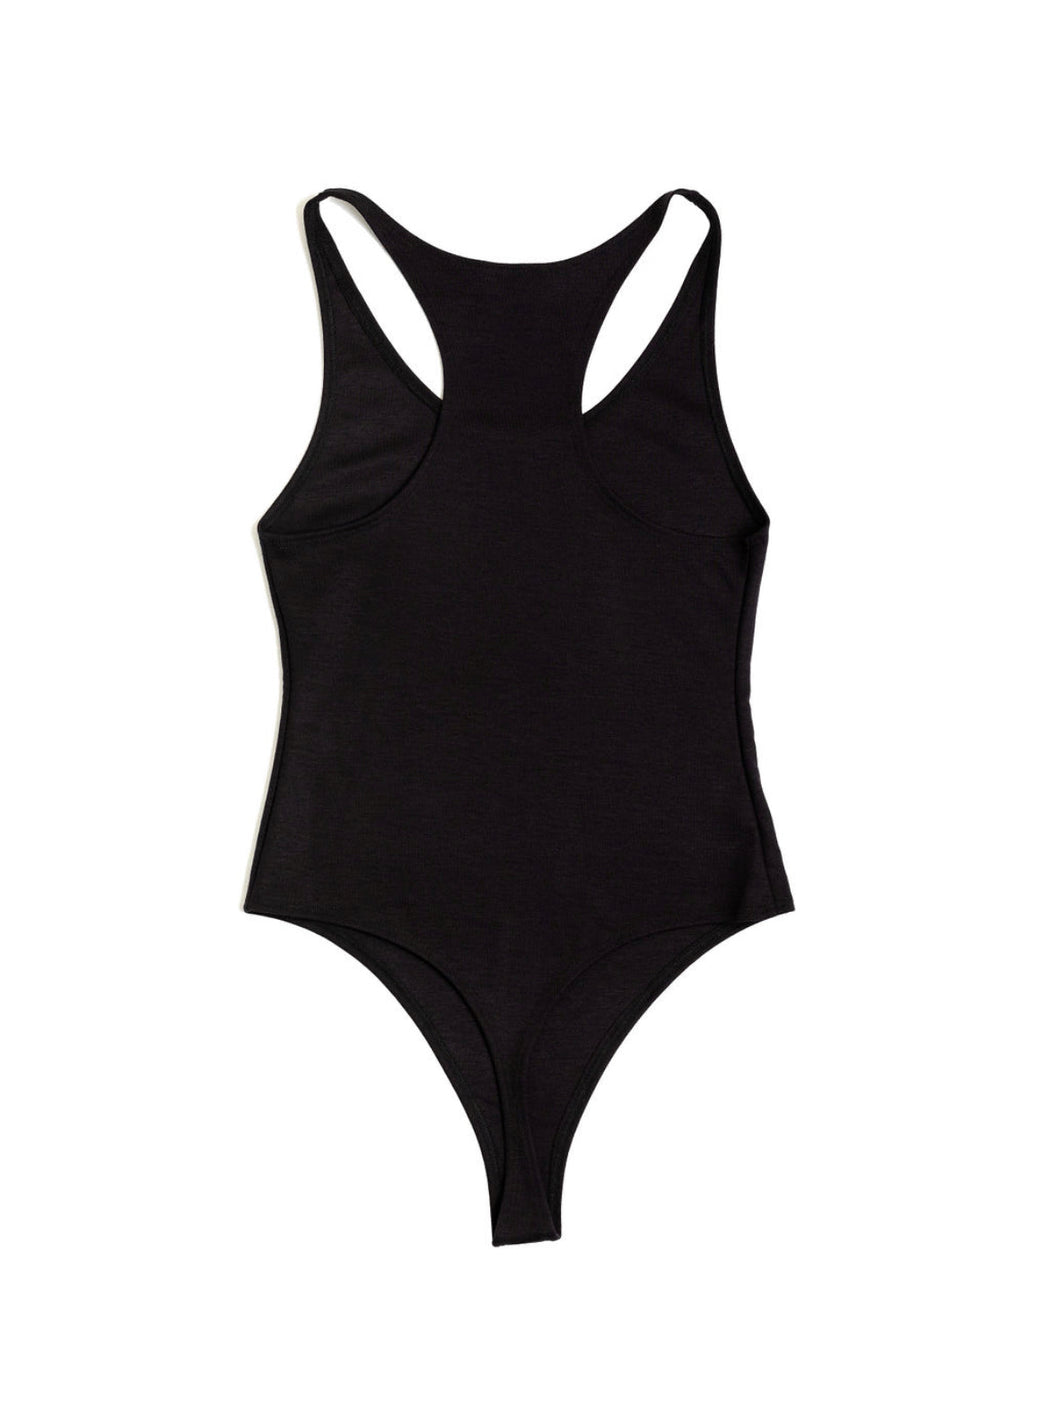 The eco-friendly bodysuit you’ve been waiting for. Available in black and white. Made in the USA with deadstock fabric.